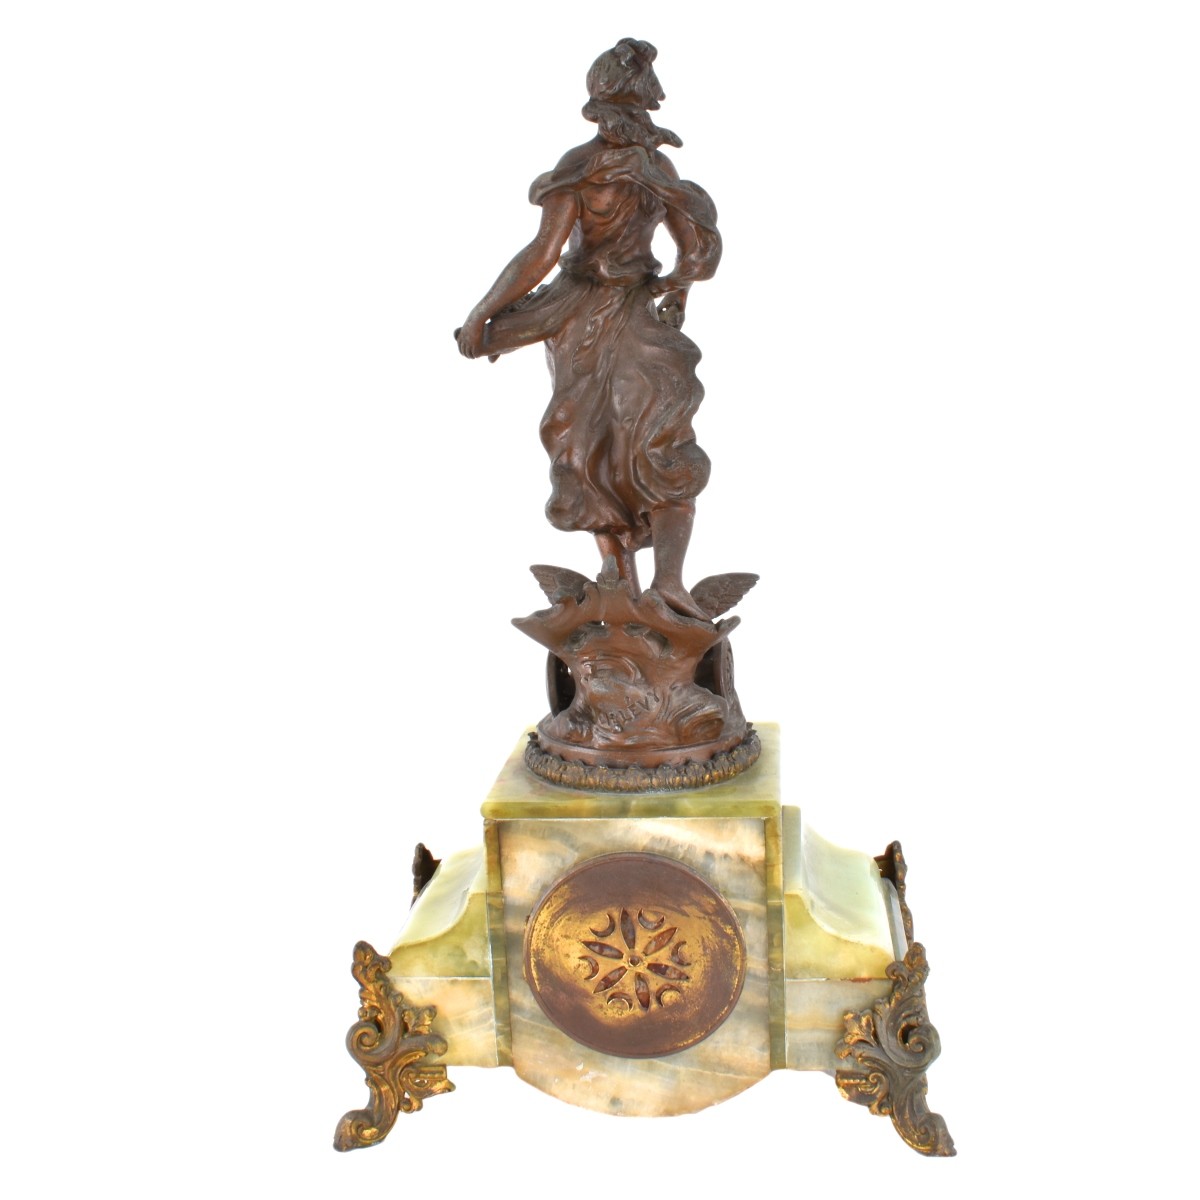 Antique Spelter And Onyx Clock